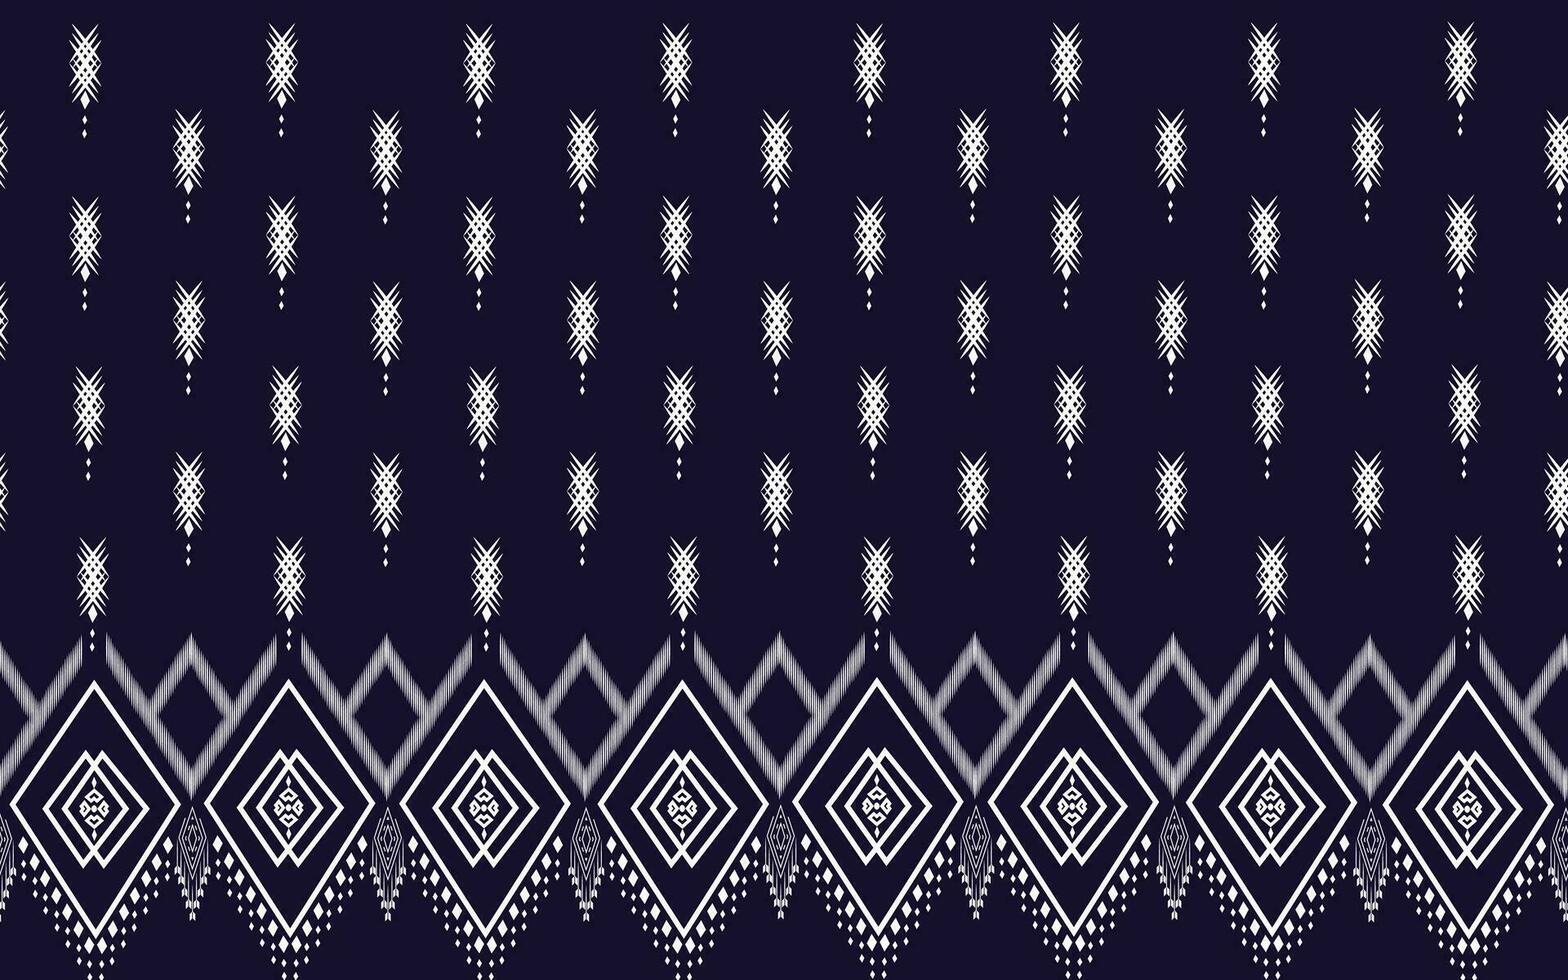 Ethnic geometric pattern, traditional design pattern used for skirt, wallpaper, clothing, wrap, batik, fabric, clothing, fashion, embroidery, seamless pattern. vector illustration.